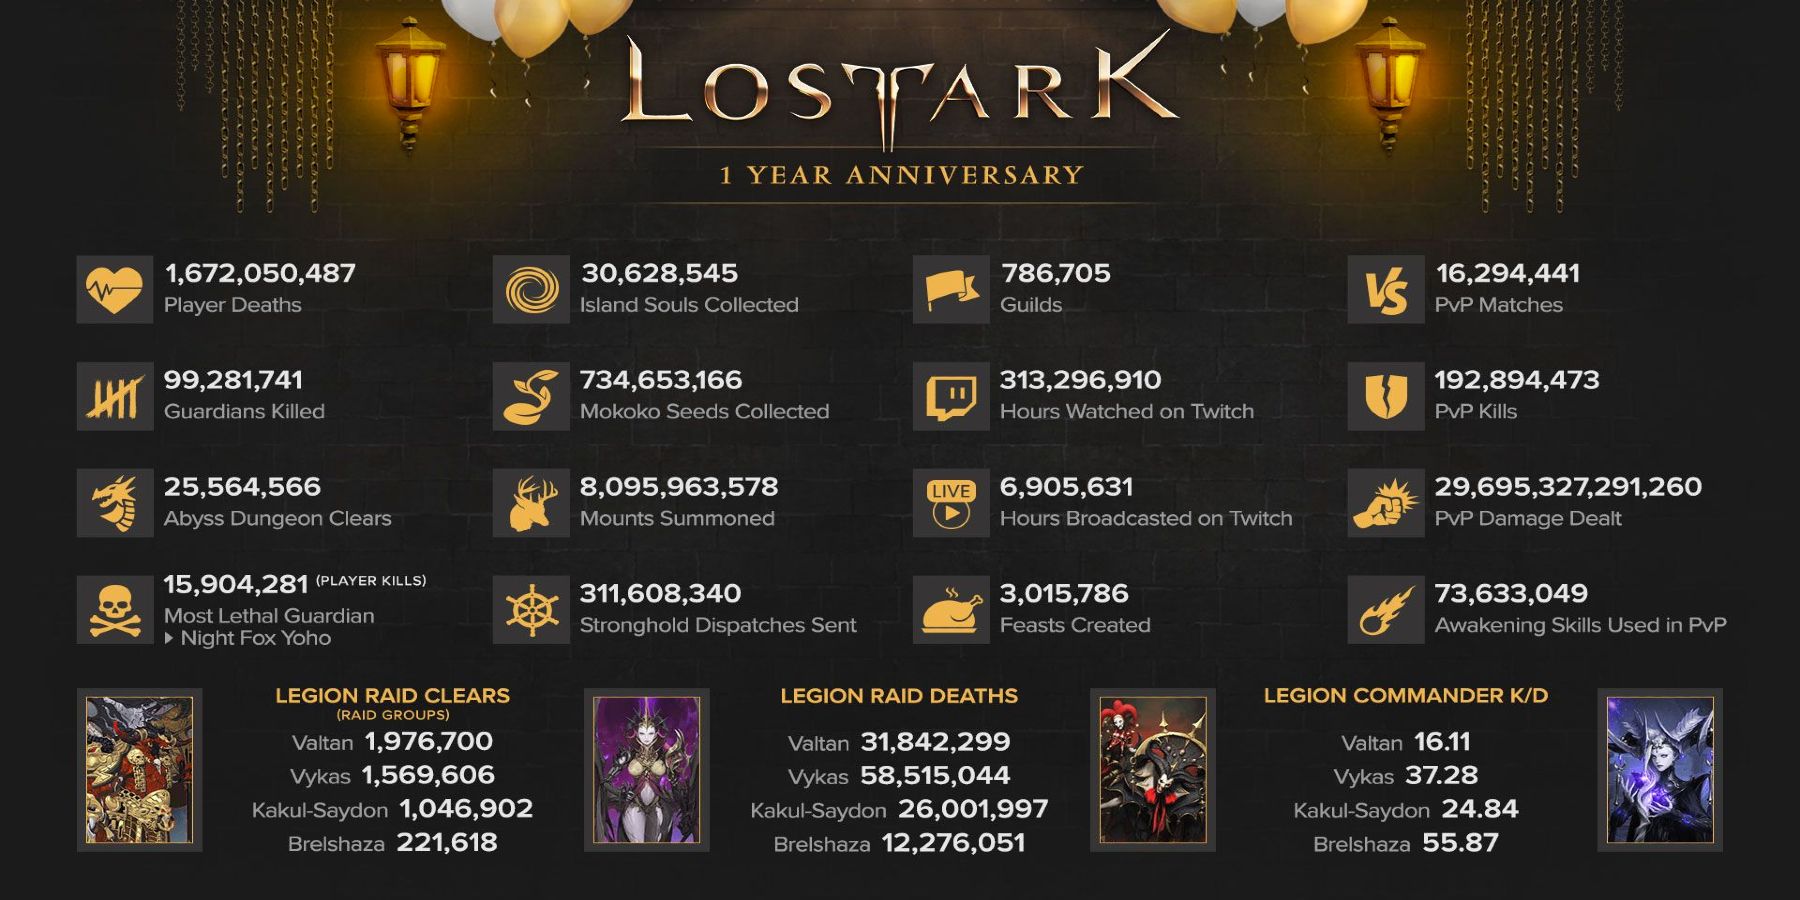 ark-lost-first-year-anniversary-infographic-1